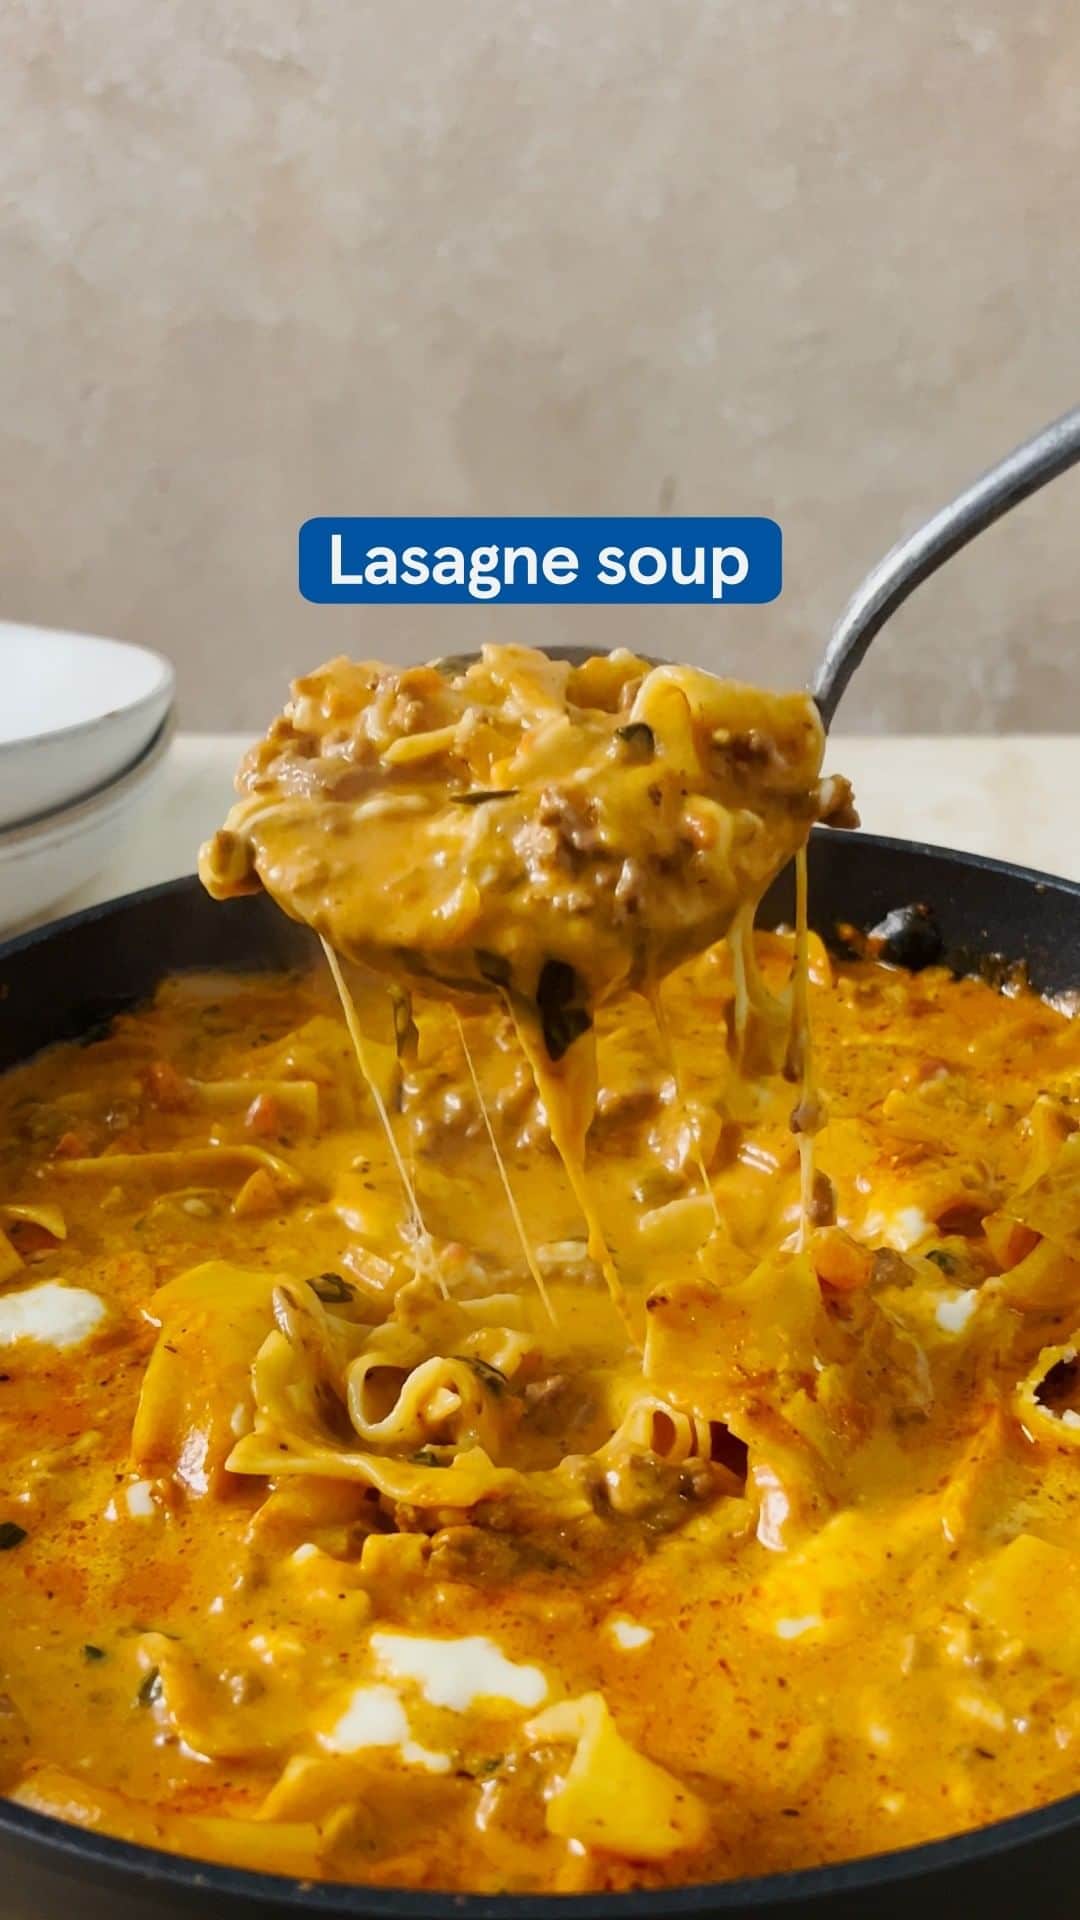 Tesco Food Officialのインスタグラム：「Italians, look away now. This may not be a traditional lasagne, but it tastes bellissimo! Find the recipe below for the ‘cheats’ lasagne soup that’s super simple to make.   Serves 4 Takes 50 mins  1 tbsp olive oil 1 onion, finely chopped 1 carrot, finely chopped 1 celery stick, finely chopped 3 large garlic cloves, crushed 500g 15% fat beef mince 3 tbsp tomato purée 2 x 400g tins chopped tomatoes 300ml beef stock 1 tbsp dried mixed herbs 1 tbsp Worcestershire sauce 9 dried lasagne sheets, snapped into pieces 100ml double cream 30g Parmesan, finely grated 75g mozzarella, grated ½ bunch fresh basil, leaves roughly chopped   1. In a large pan, heat the olive oil over a low heat. Fry the onion, carrot, celery and garlic for 5 mins, or until softened. Add the mince and fry on a medium heat until golden. Stir in the tomato purée, chopped tomatoes and stock. Add in the mixed herbs and Worcestershire sauce and simmer for 15 mins. Season with salt and pepper. 2. Stir in the snapped lasagne sheets and cook for 10-12 minutes until the lasagne sheets are al dente. You might need to add a splash more water to loosen the sauce/help cook the pasta. 3. Stir in the double cream, Parmesan, mozzarella and the basil leaves. Serve in bowls with a good grinding of black pepper.」